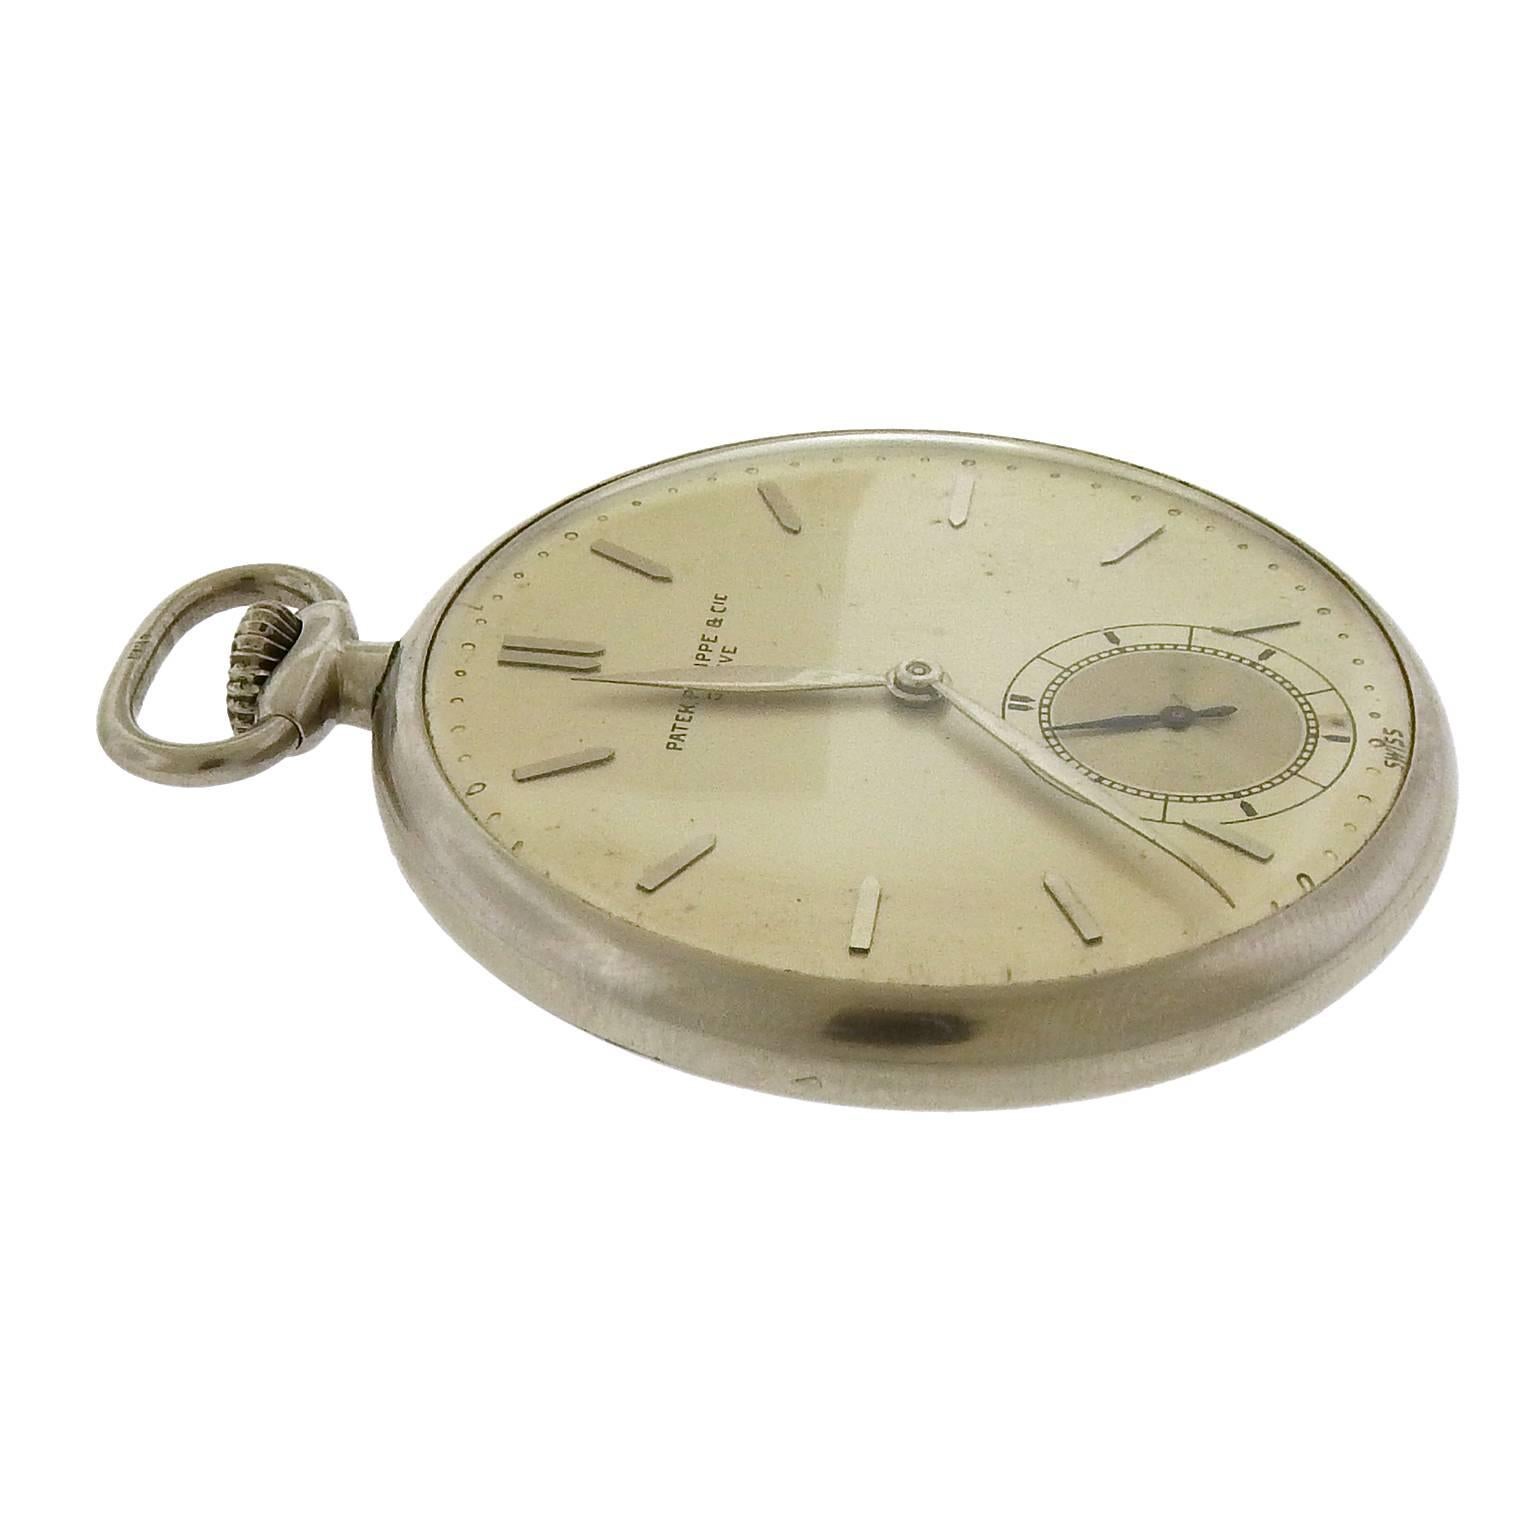 Rare stainless steel Patek Philippe slim open face pocket watch, circa 1935, has a 41mm case, matte silvered dial with two-tone seconds register, applied white gold dart baton hour indexes, white gold leaf hands.  The manual wind movement is